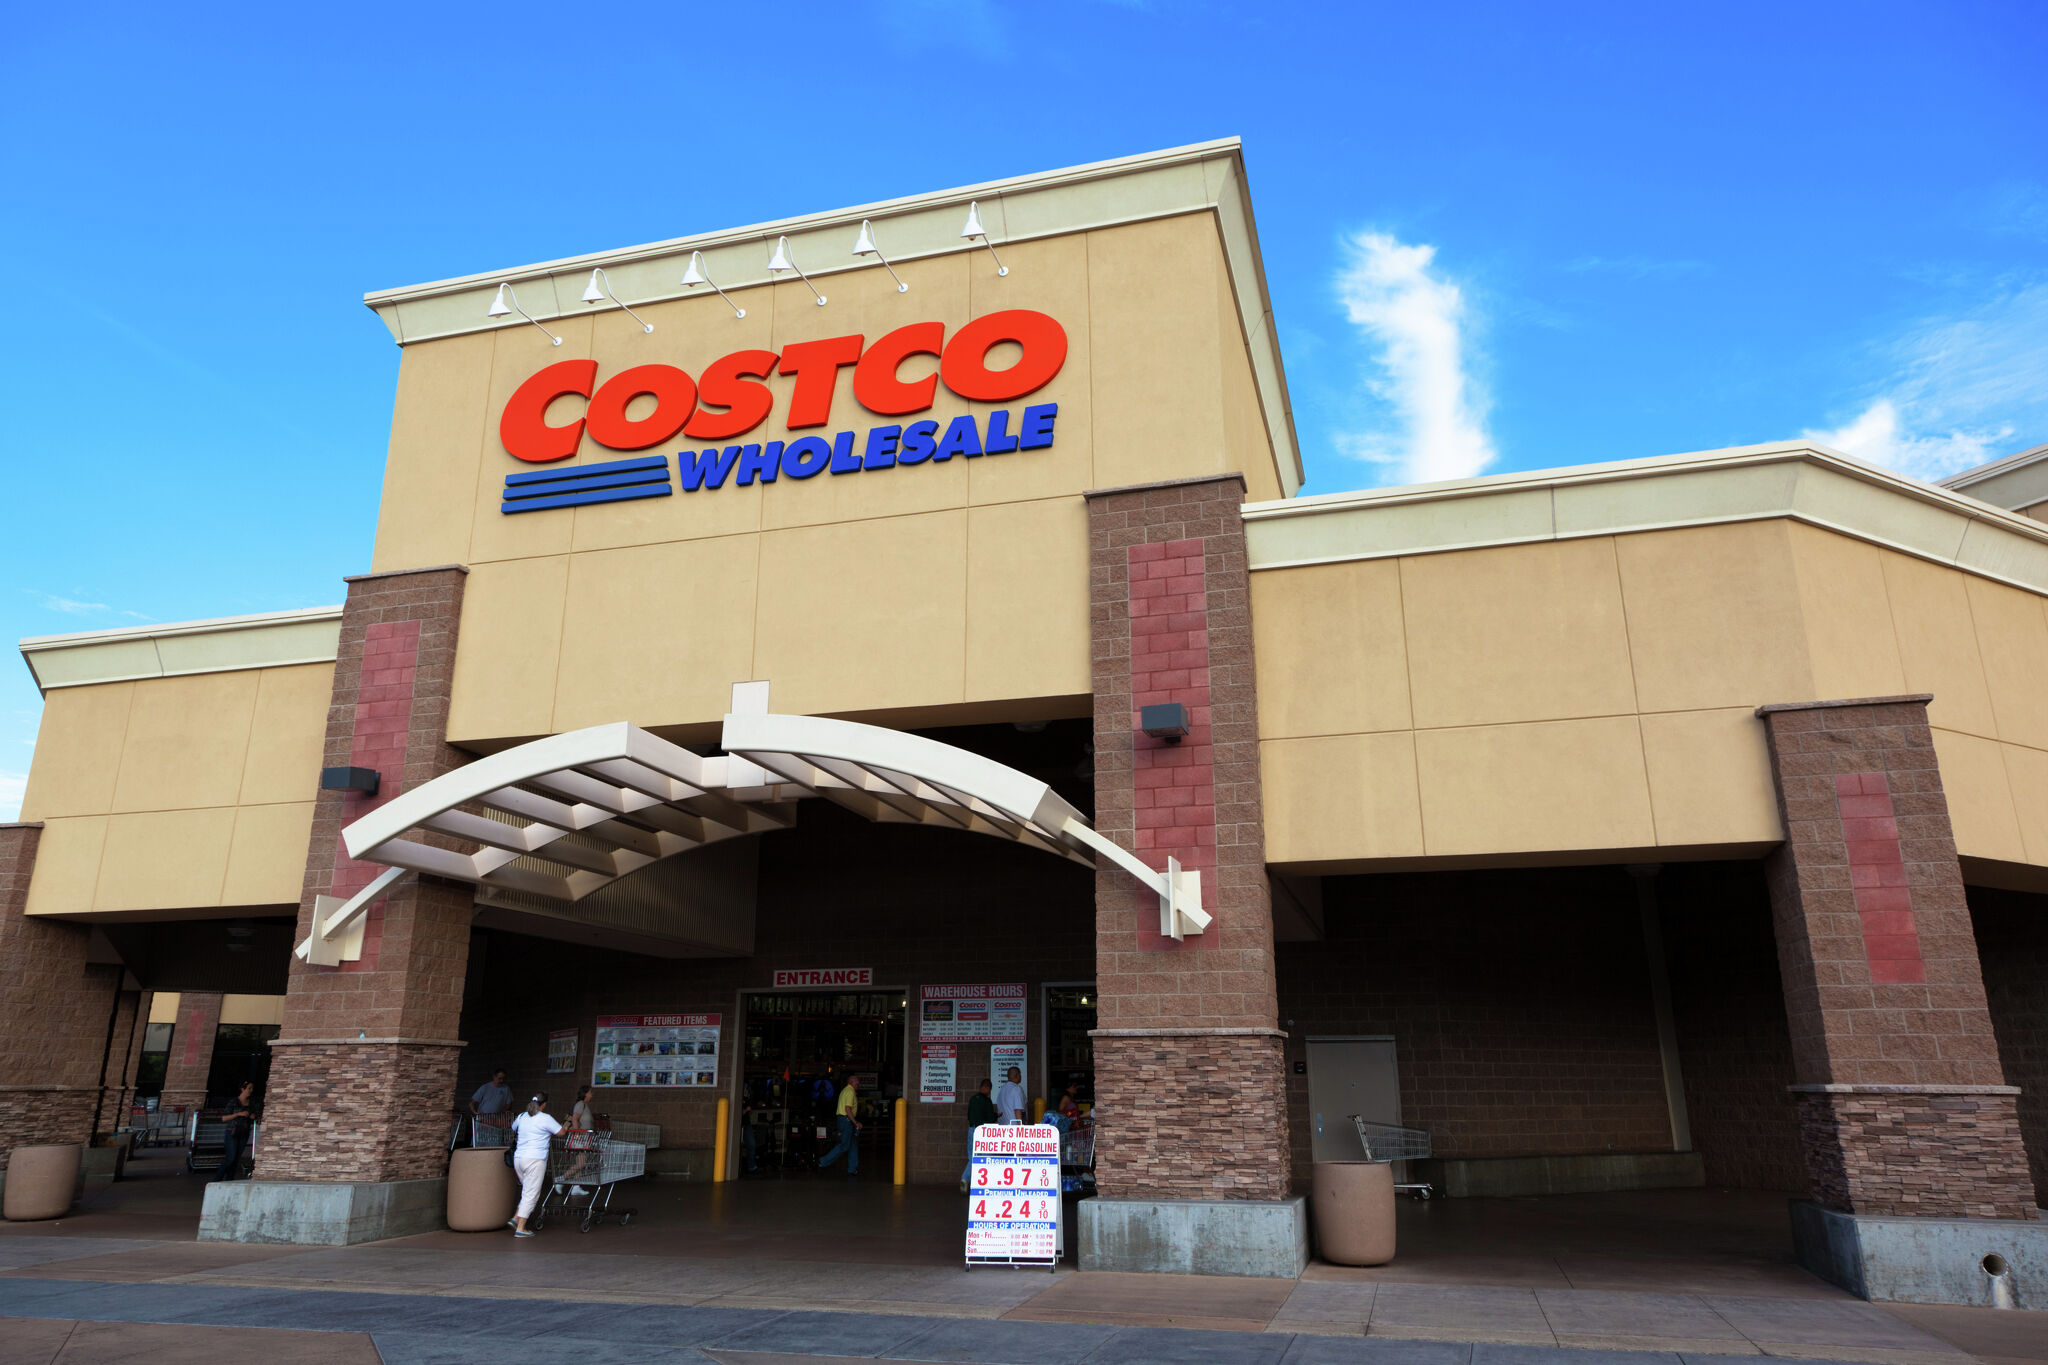 A one-year Costco membership comes with a free $30 gift card right now